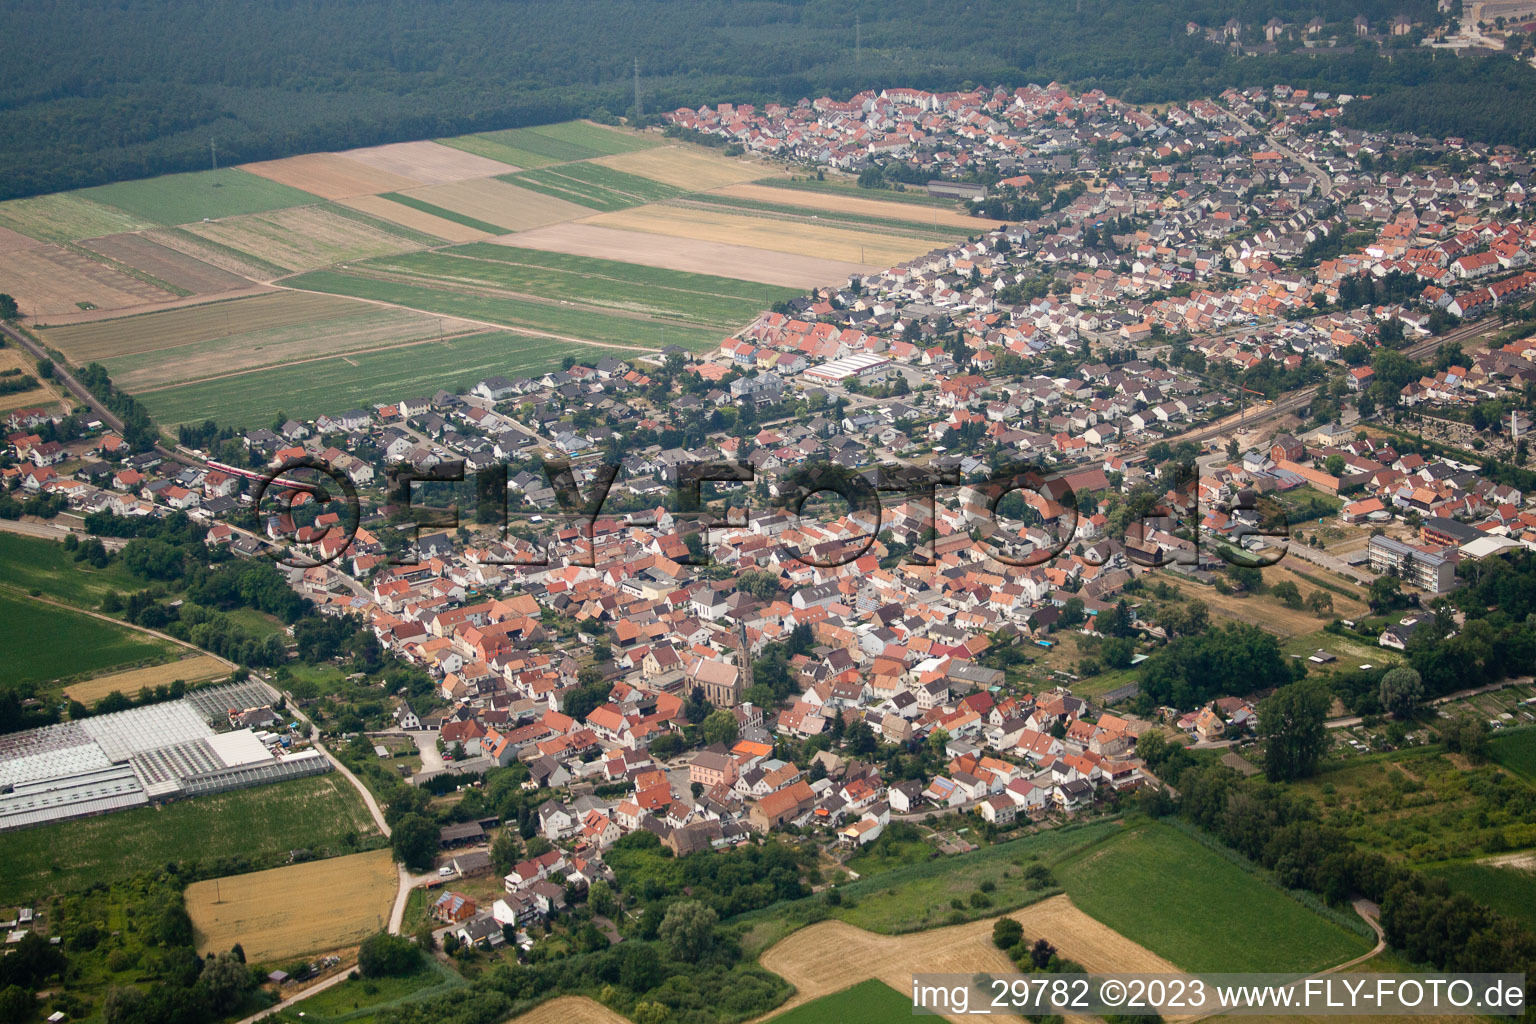 District Sondernheim in Germersheim in the state Rhineland-Palatinate, Germany out of the air